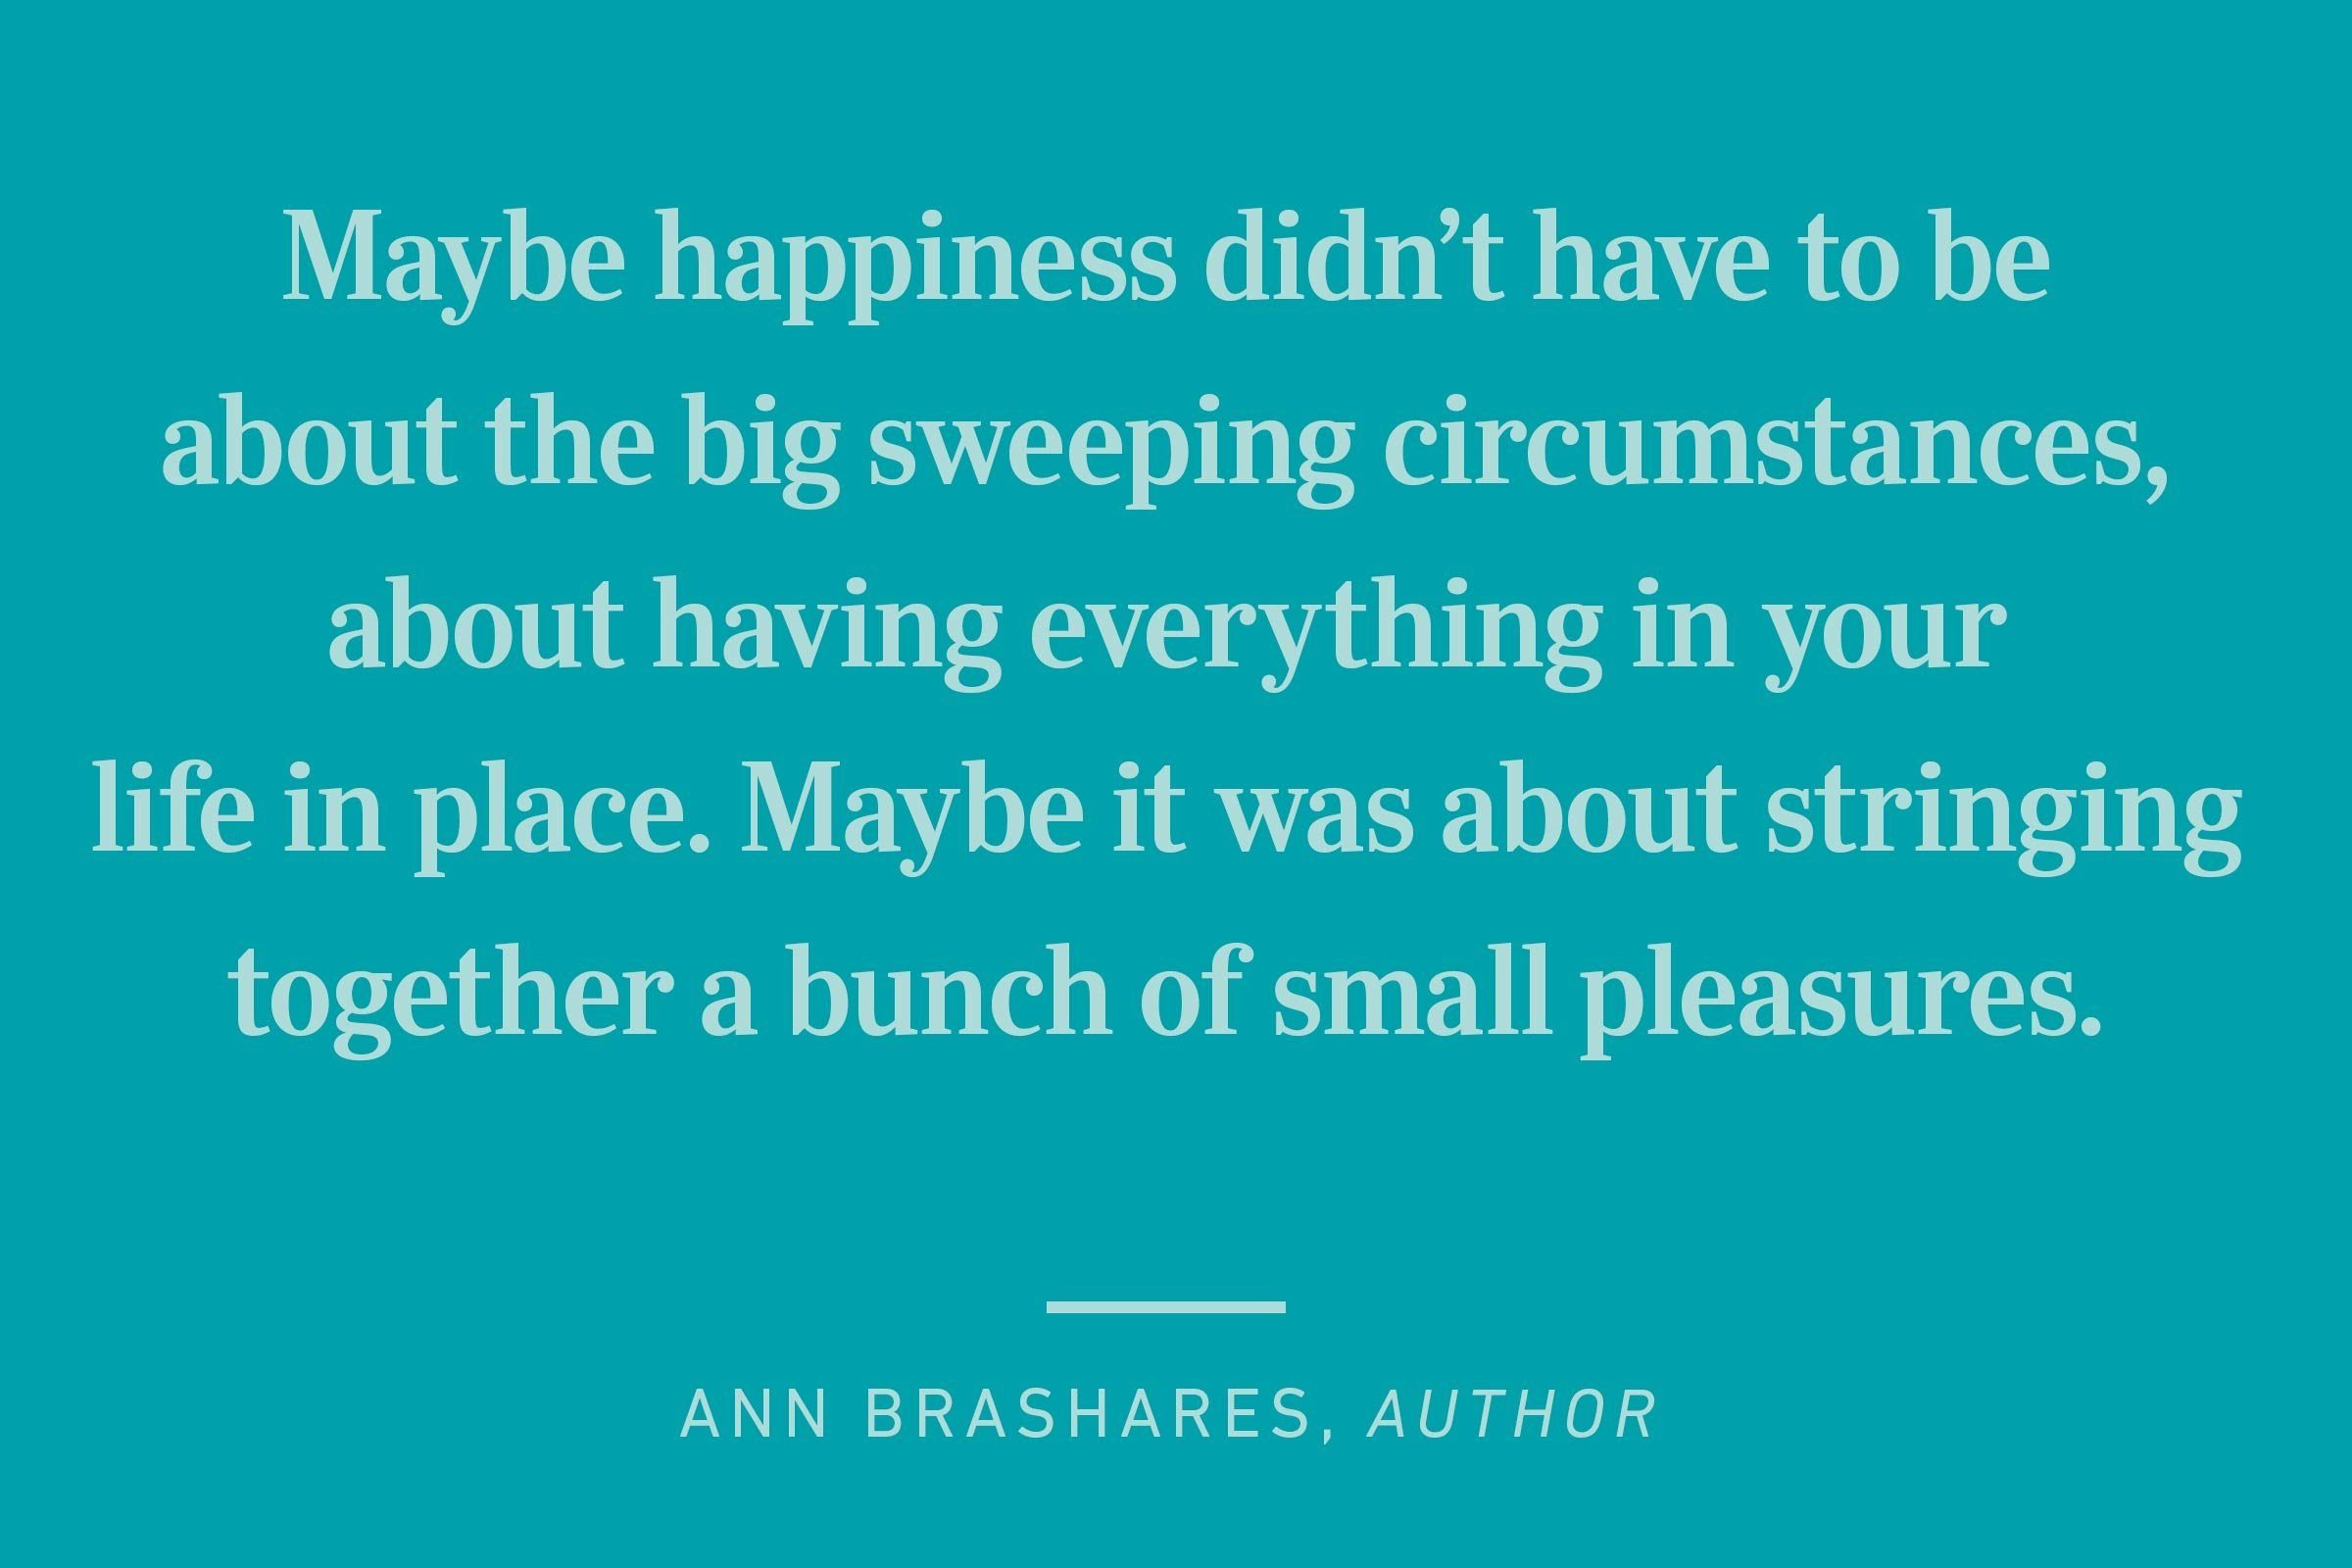 ann brashares happiness quote